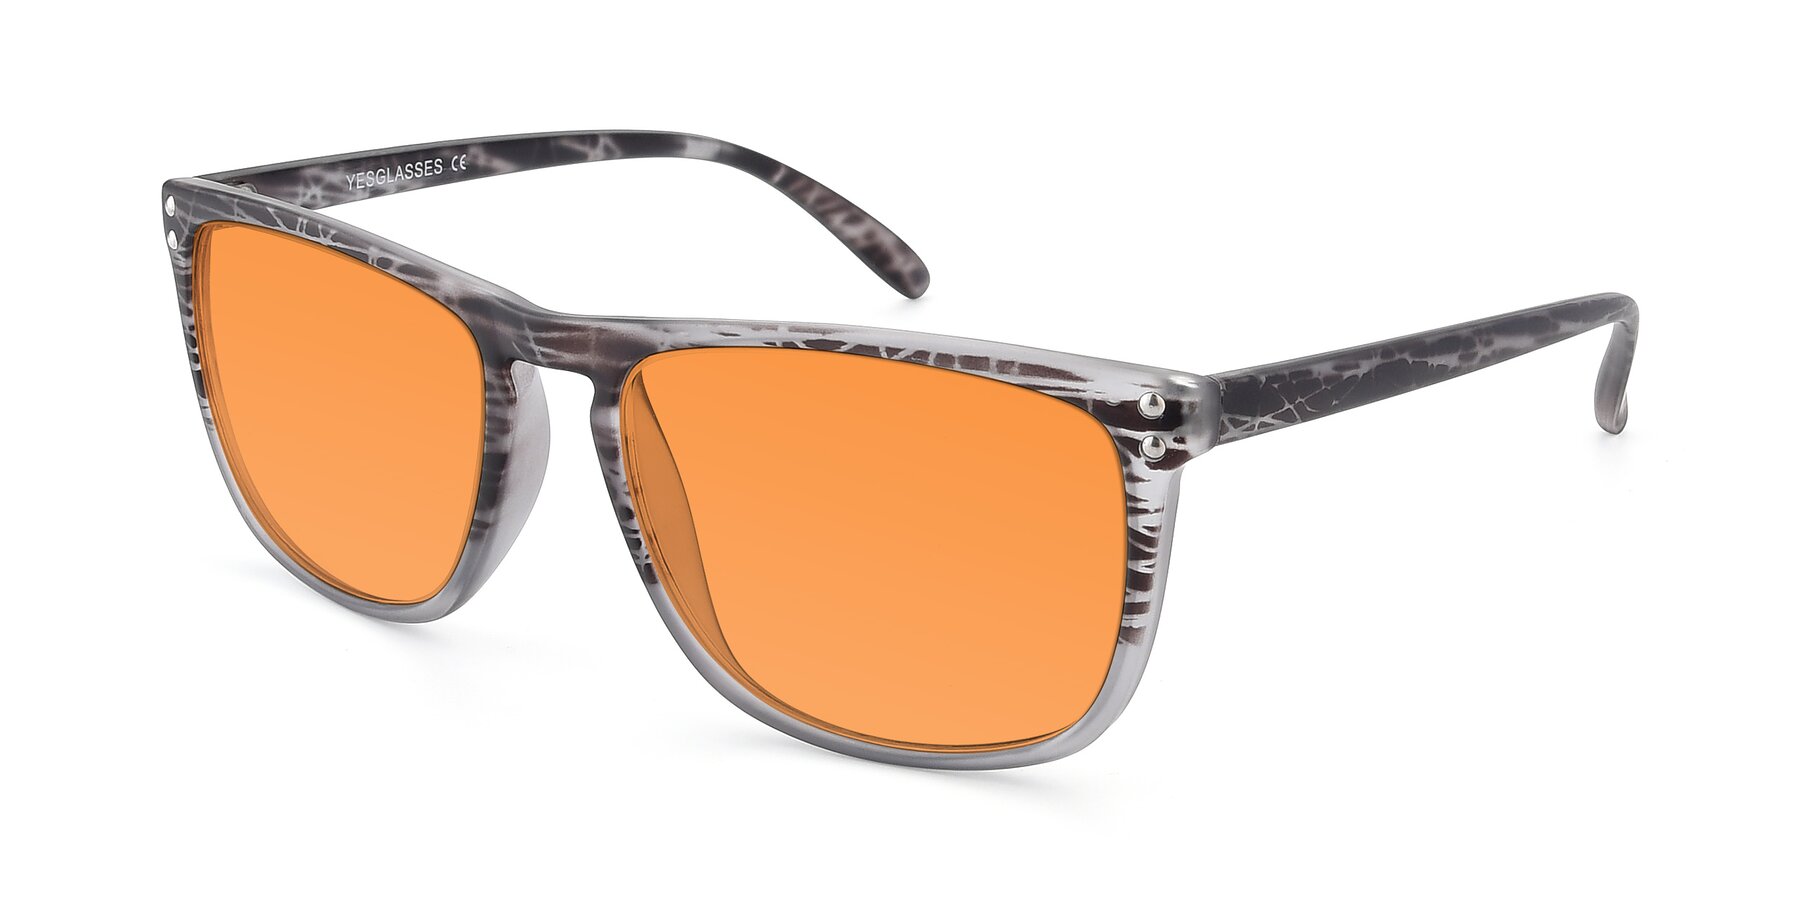 Angle of SSR411 in Translucent Floral Grey with Orange Tinted Lenses